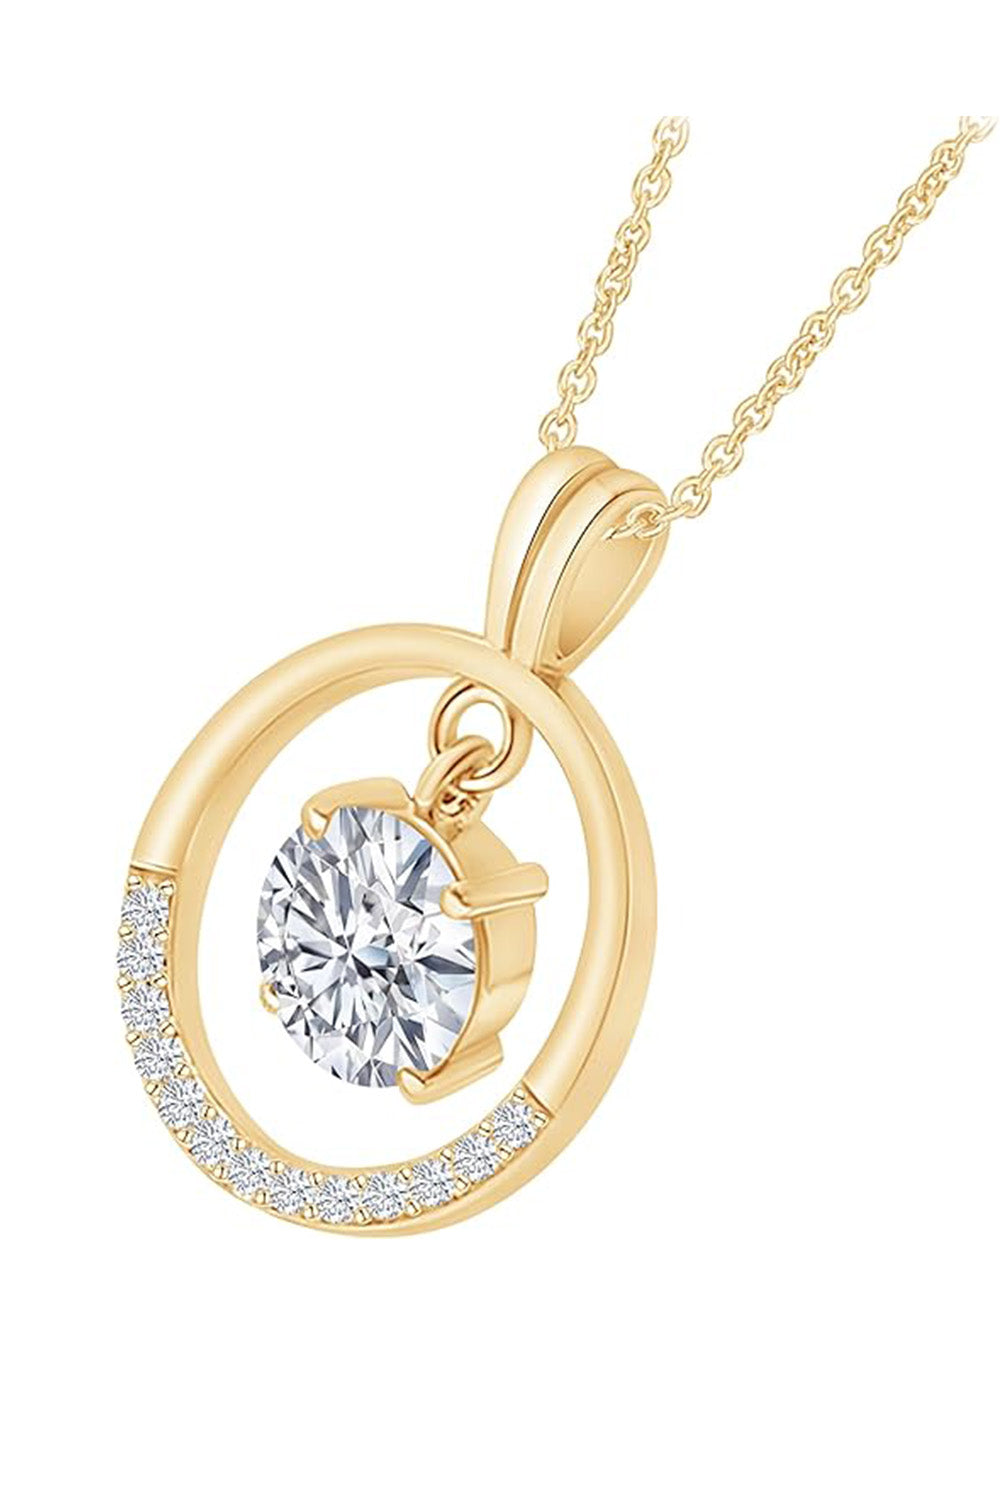 1 Carat Lab Created Moissanite Diamond Dancing Pendant Necklace in 18K Gold Plated 925 Sterling Silver